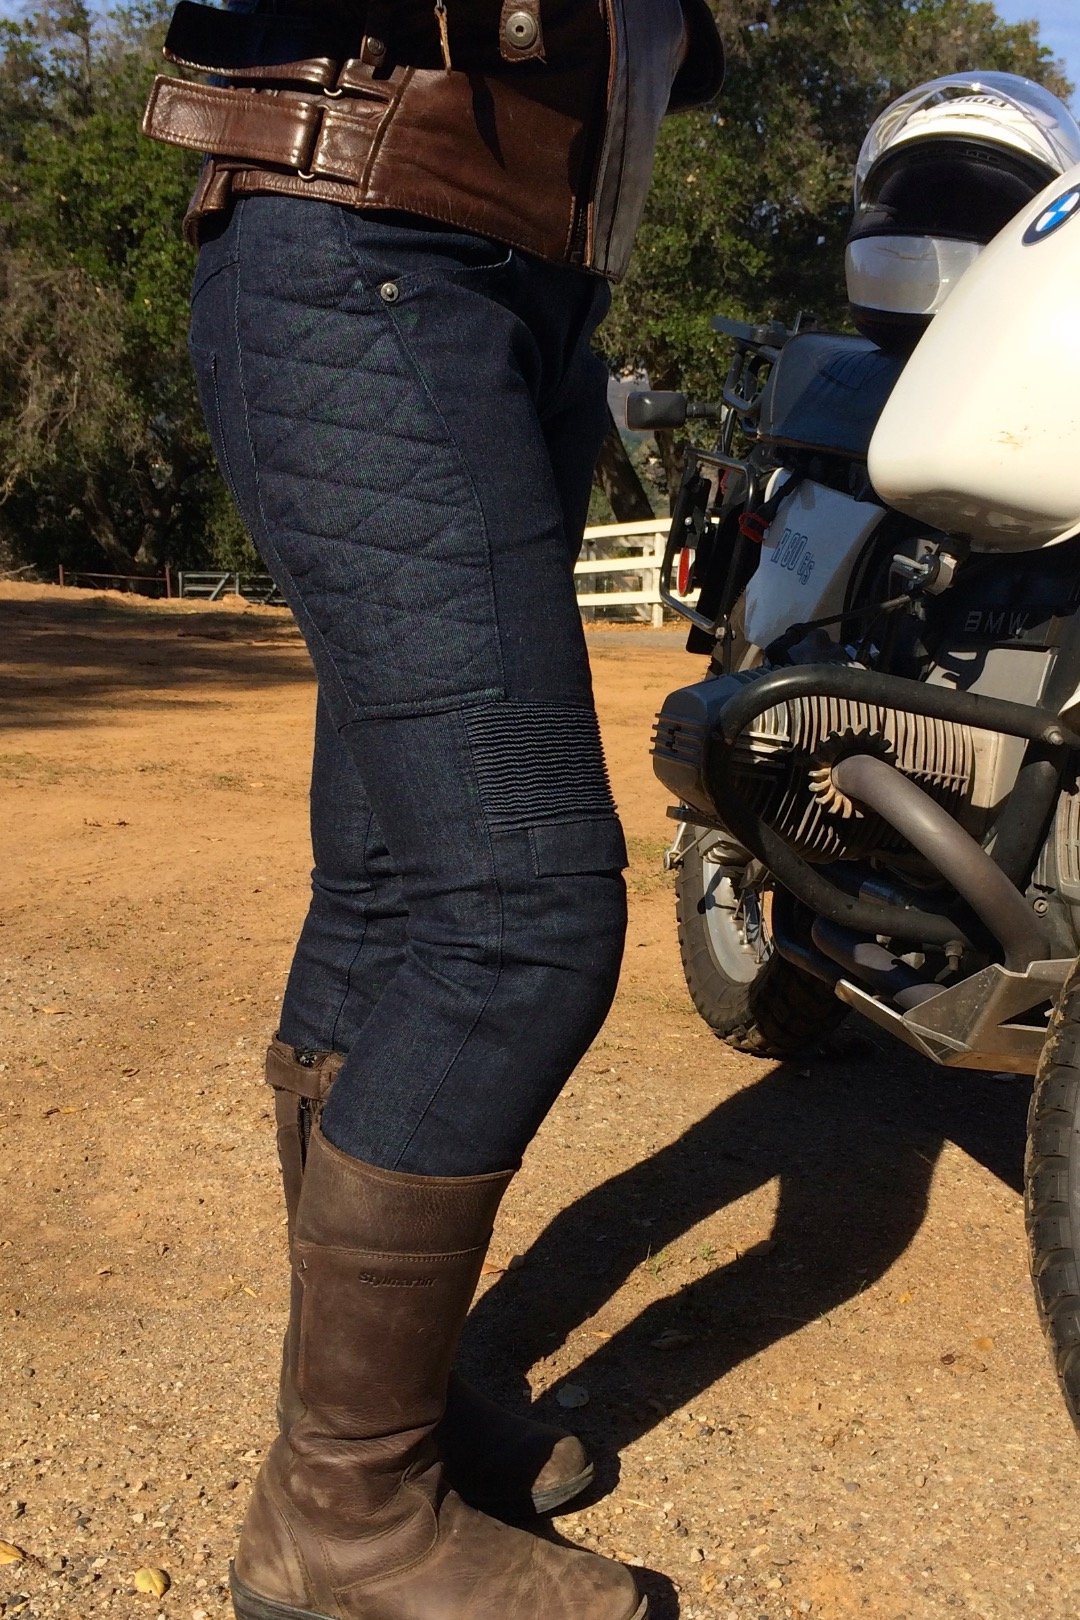 Pando-Moto-Rosie-womens-motorcycle-jeans-review-2 - GLORIOUS MOTORCYCLES